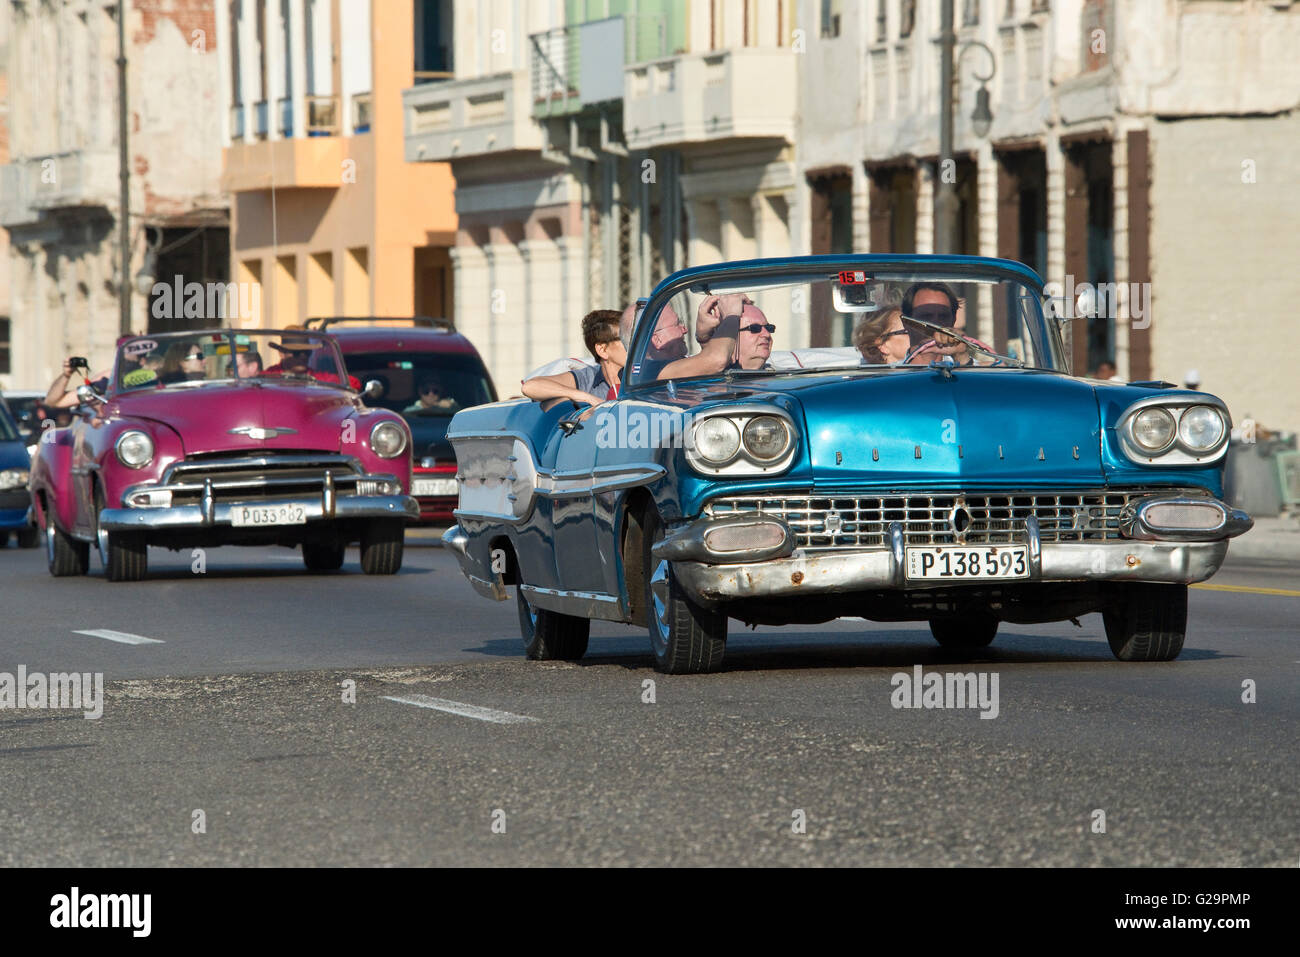 A 1958 Pontiac Super Chief (Blue Car) and a 1950 Chevrolet Bel Air (Purple Car) travelling along the Malecón in Havana, Cuba. Stock Photo